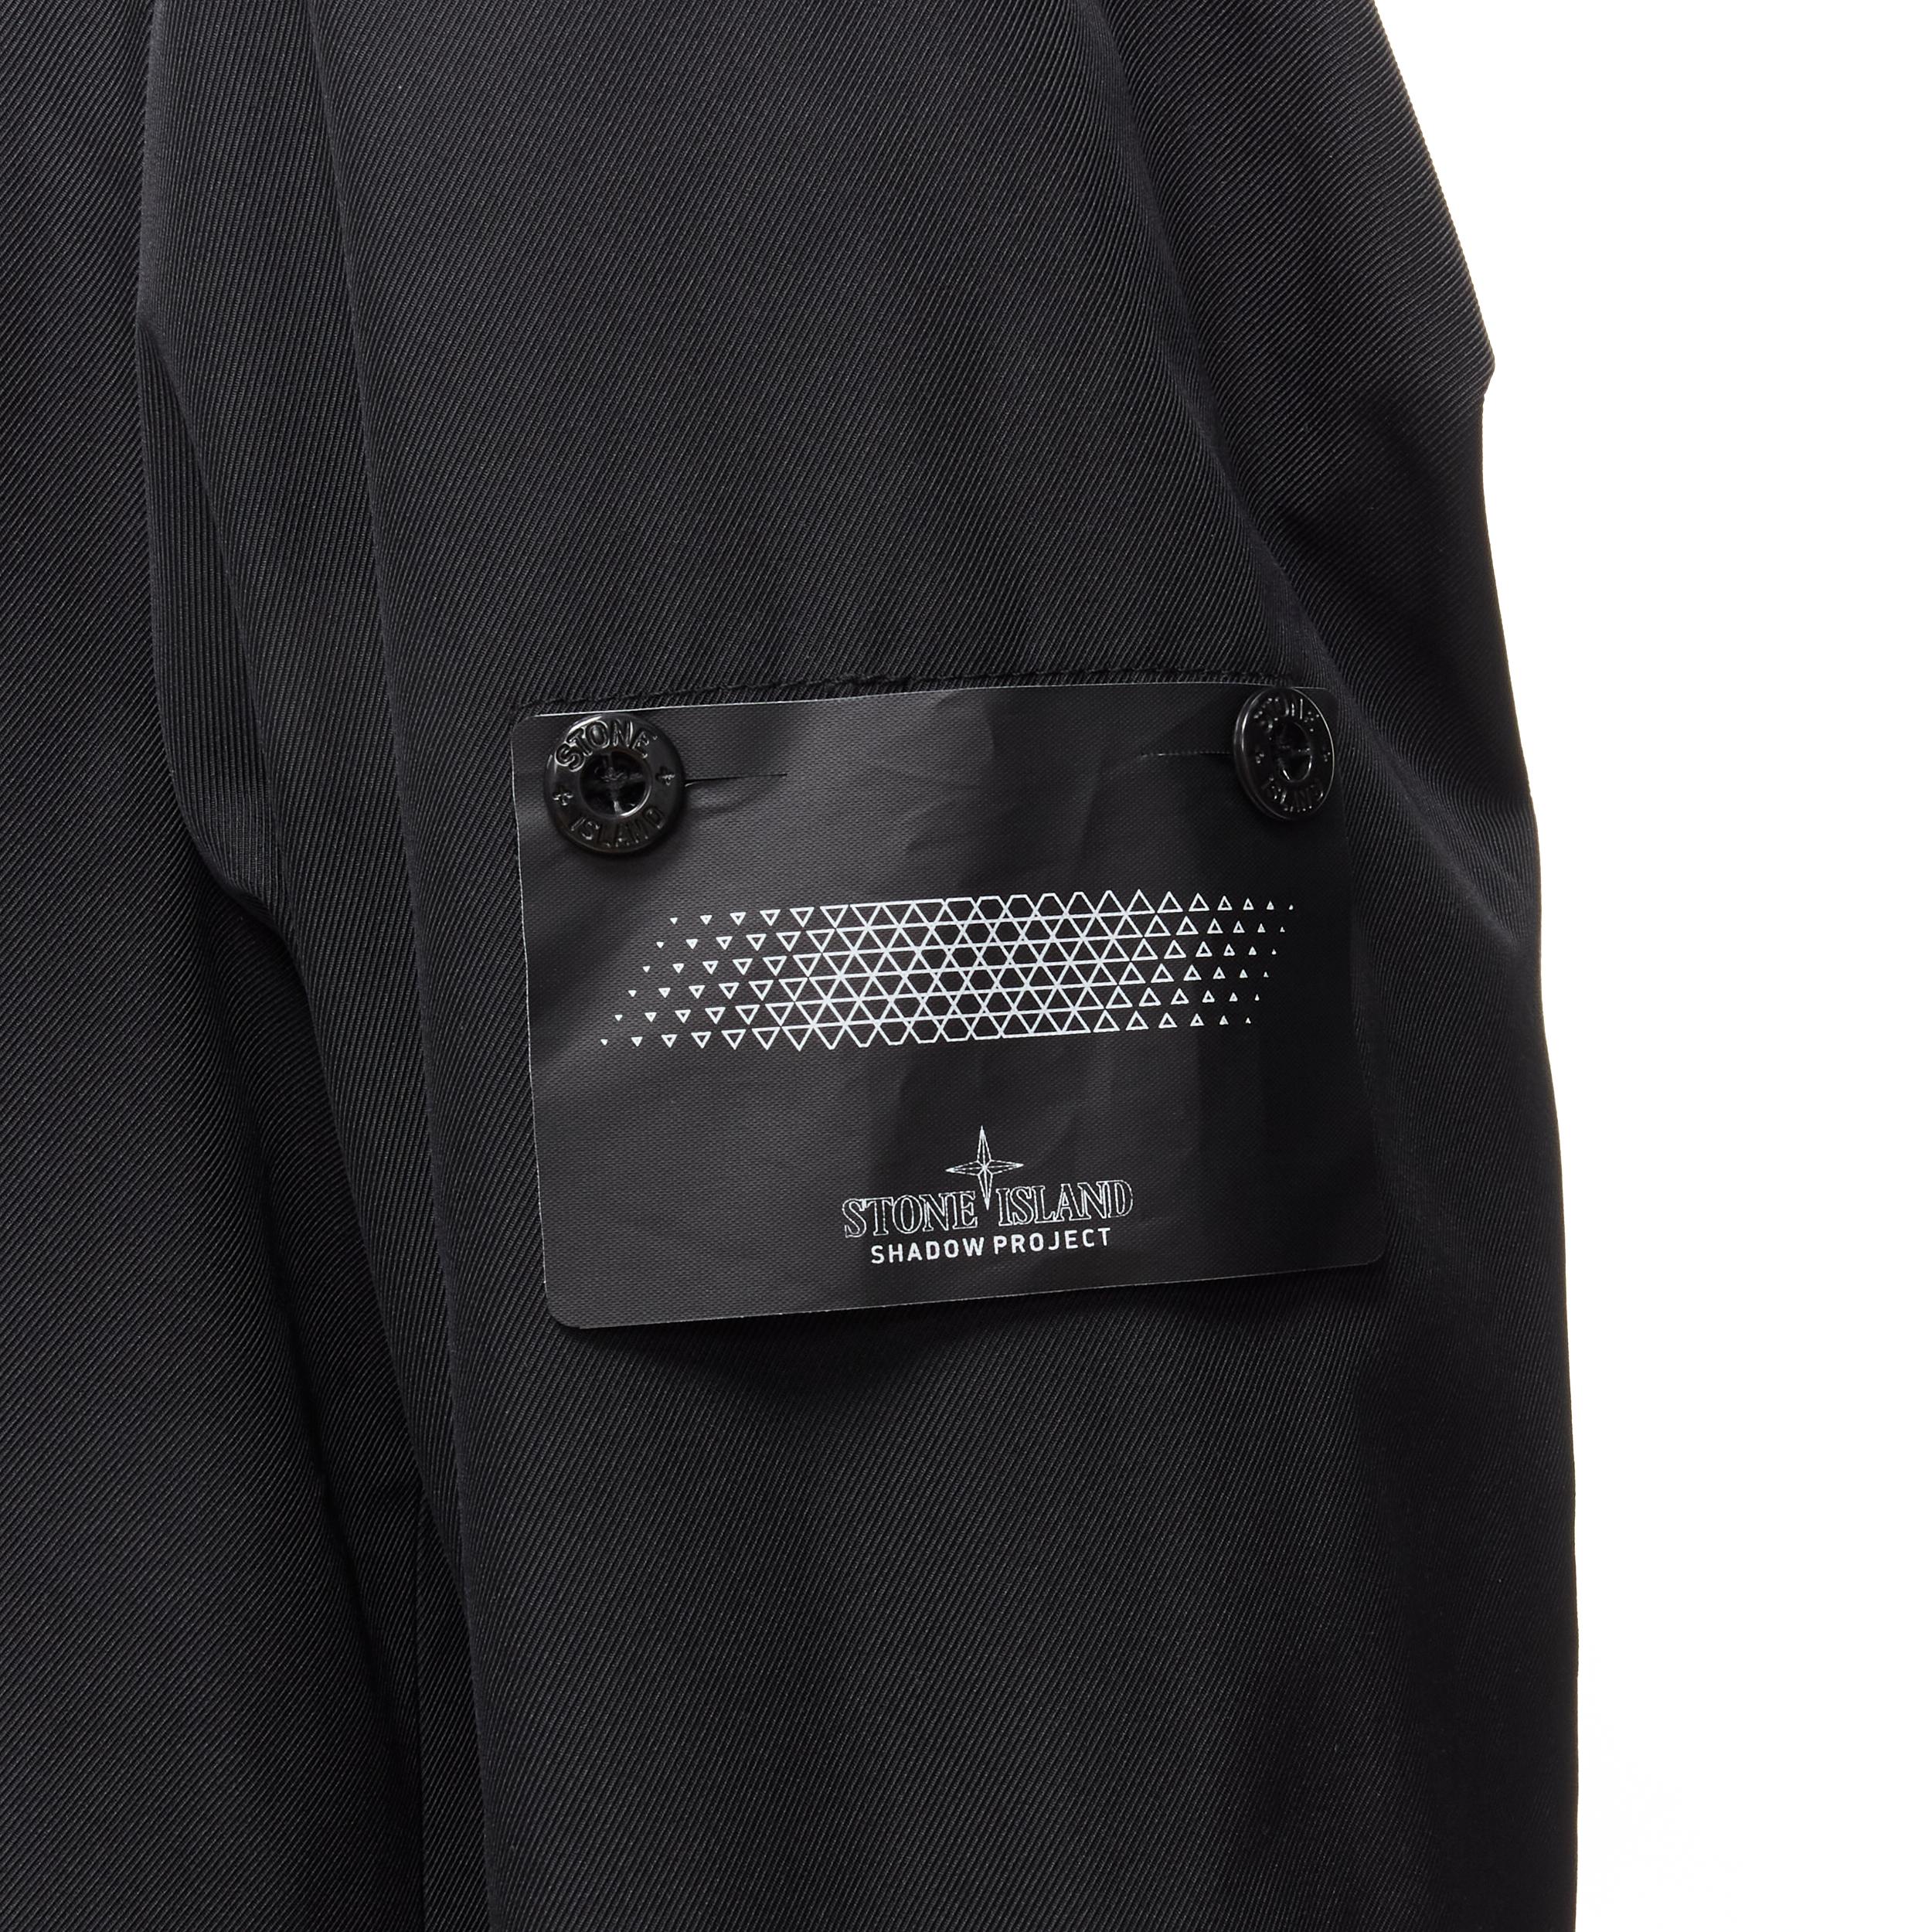 new STONE ISLAND Shadow Project black technical nylon logo patch blazer jacket S
Reference: TGAS/D00202
Brand: Stone Island
Collection: Shadow Project
Material: Nylon
Color: Black
Pattern: Solid
Closure: Button
Extra Details: Logo buttons.
Estimated